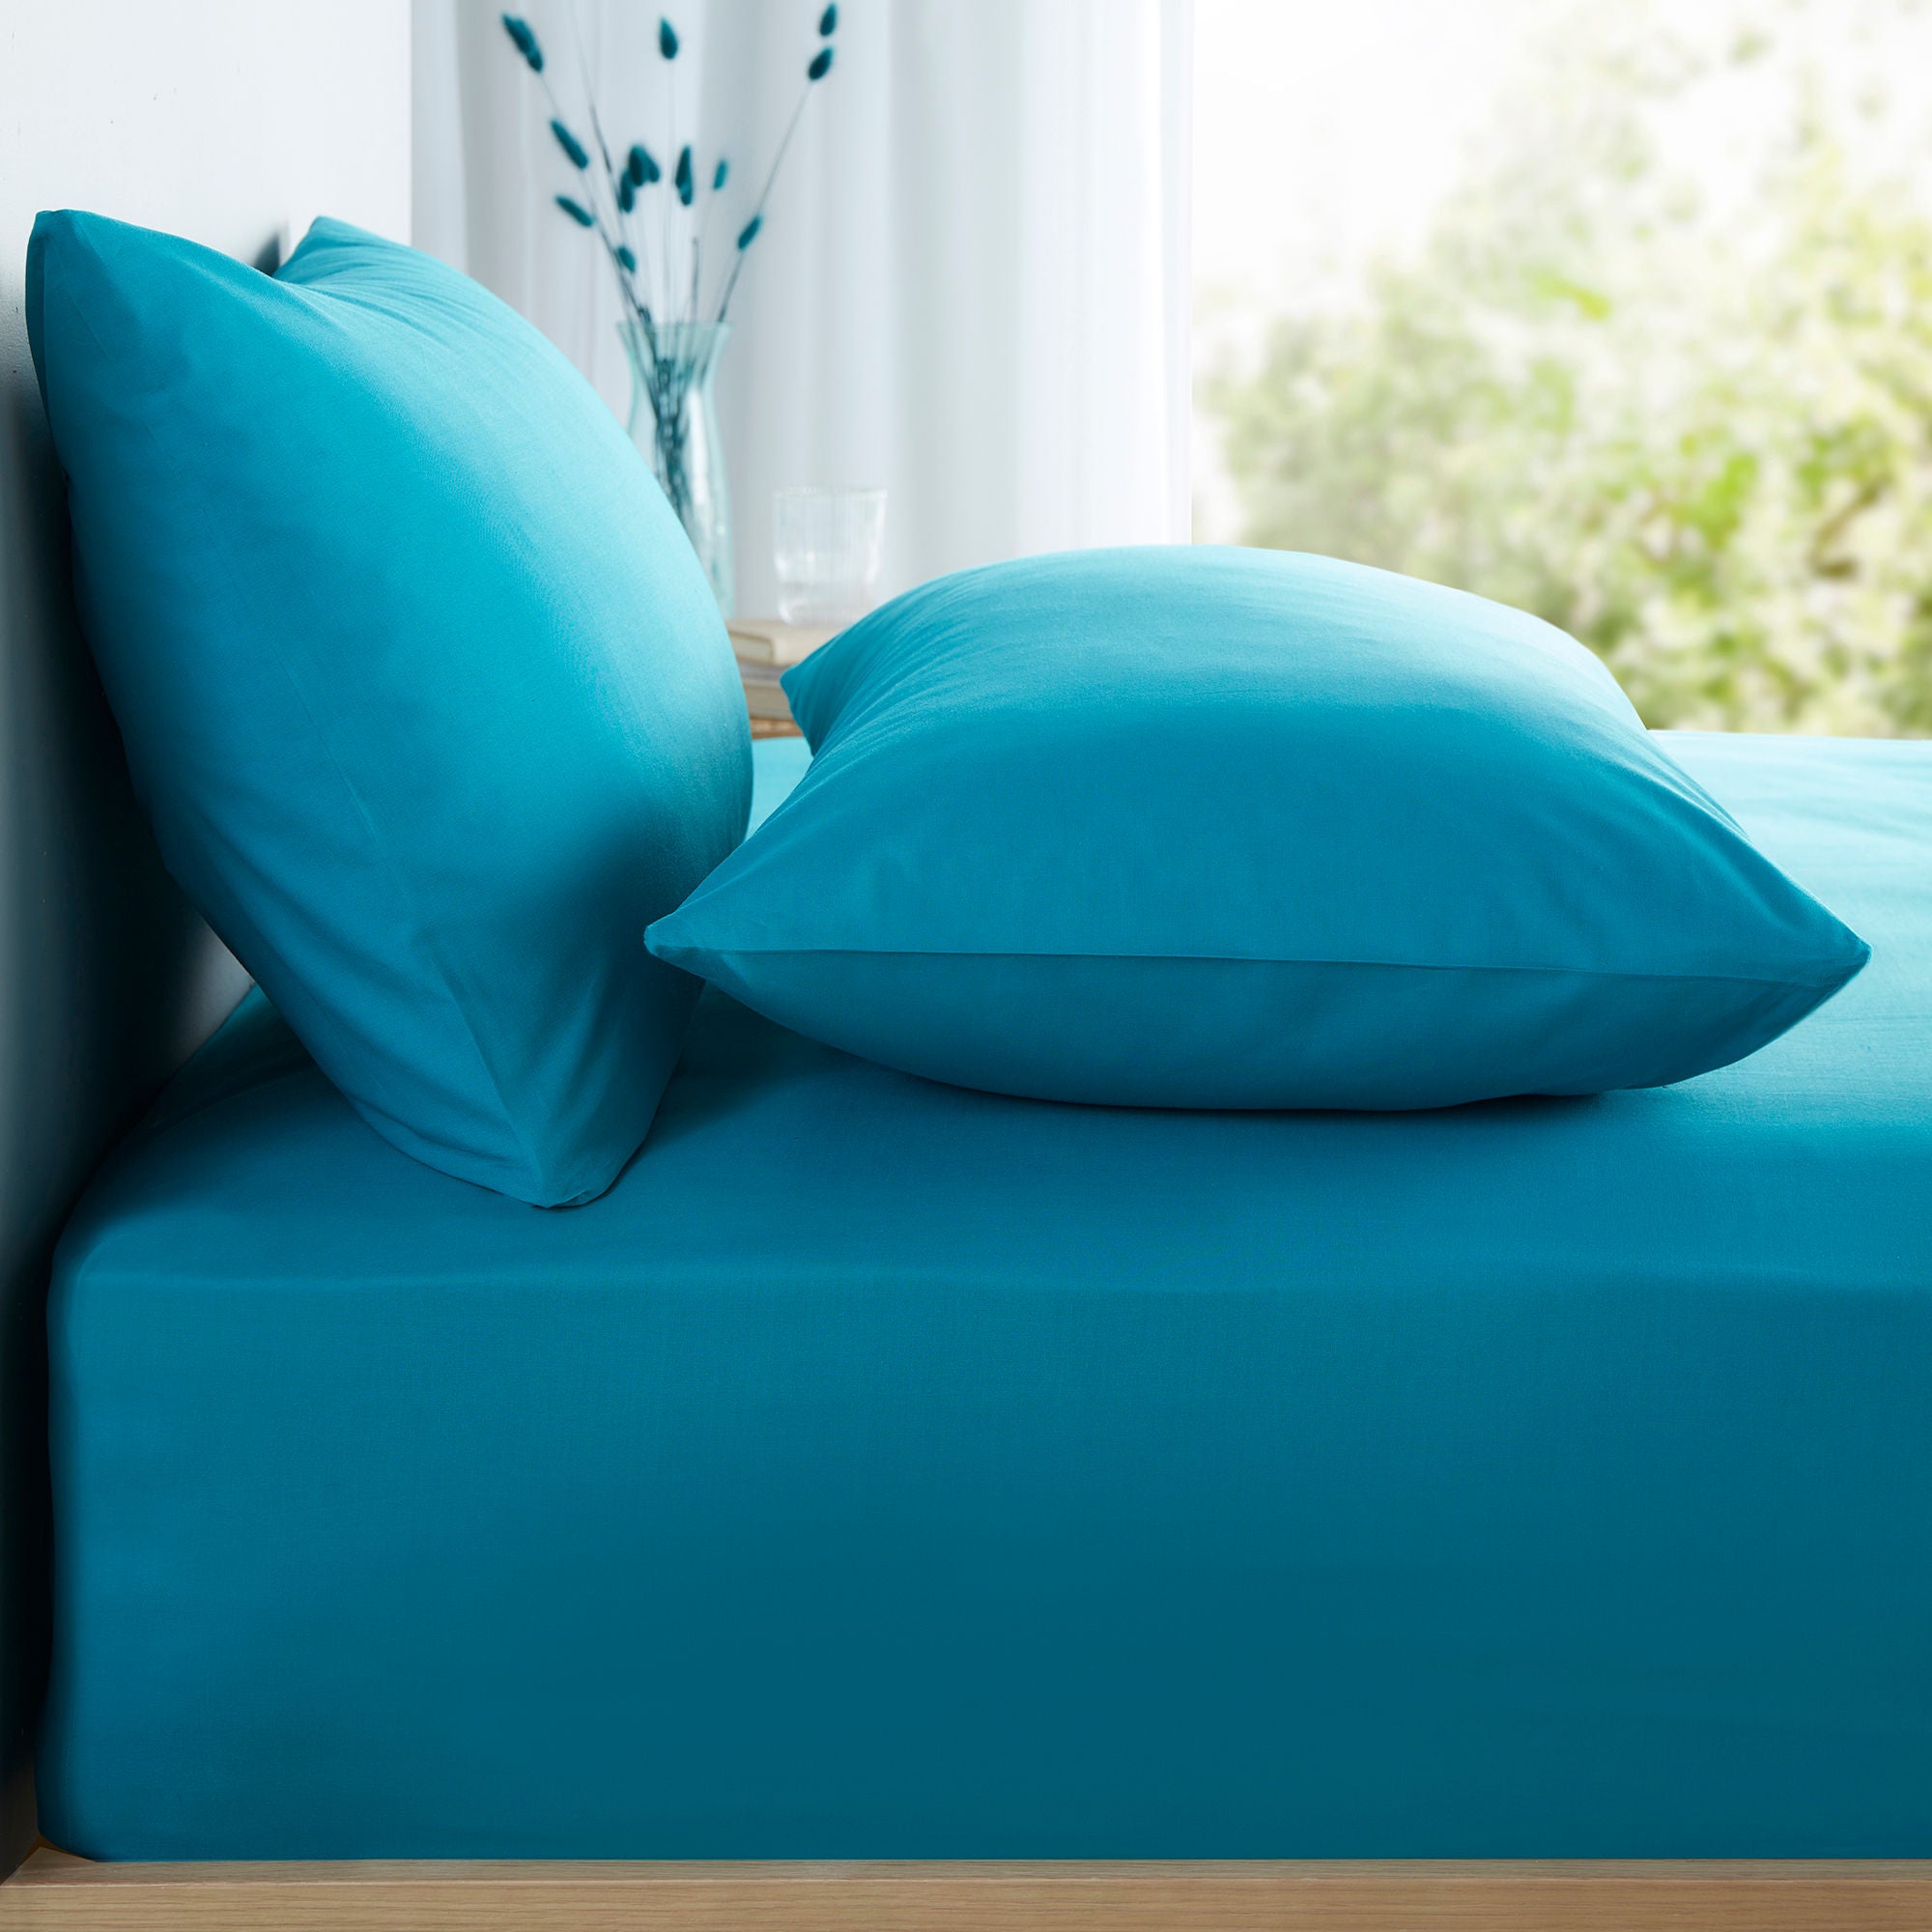 Appletree Pure Cotton 28cm Fitted Bed Sheet by Appletree Style in Teal - 28cm Fitted Bed Sheet - Appletree Style